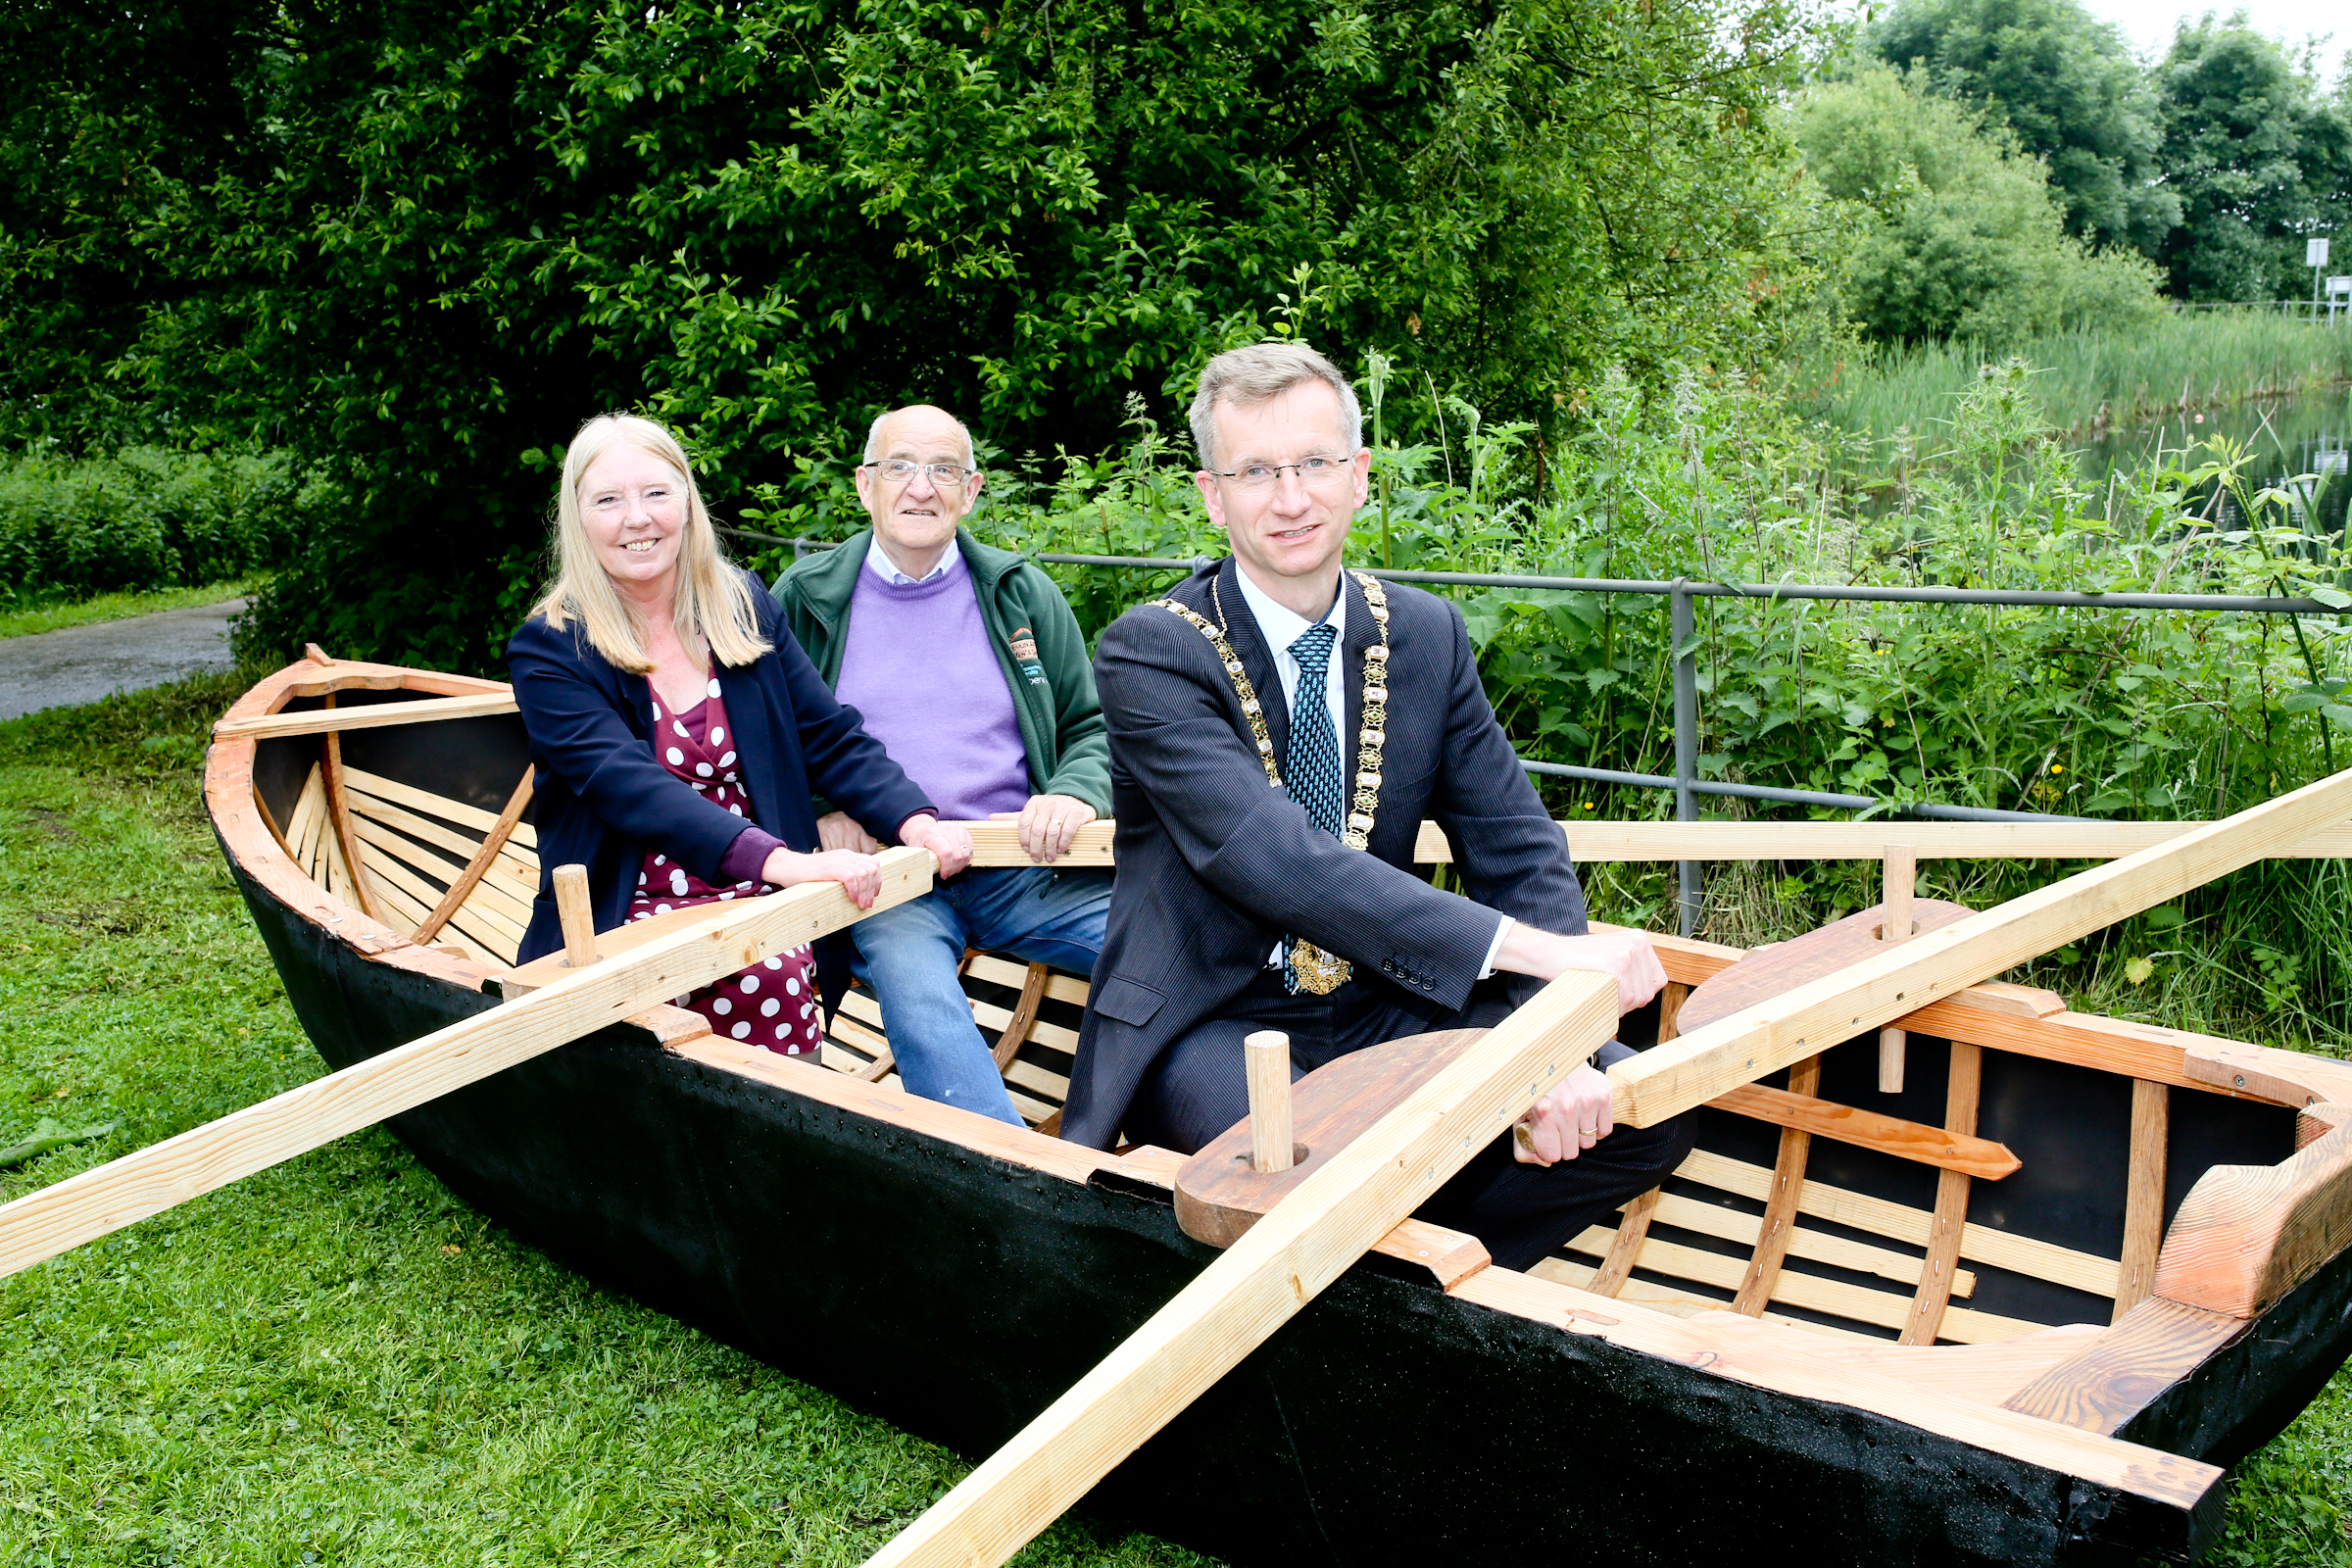 Lord Mayor Brian Kingston with Annie Armstrong from the Colin Neighbourhood Partnership and Liam Skeffington, a member of Colin Men’s Shed who helped handcraft the currach